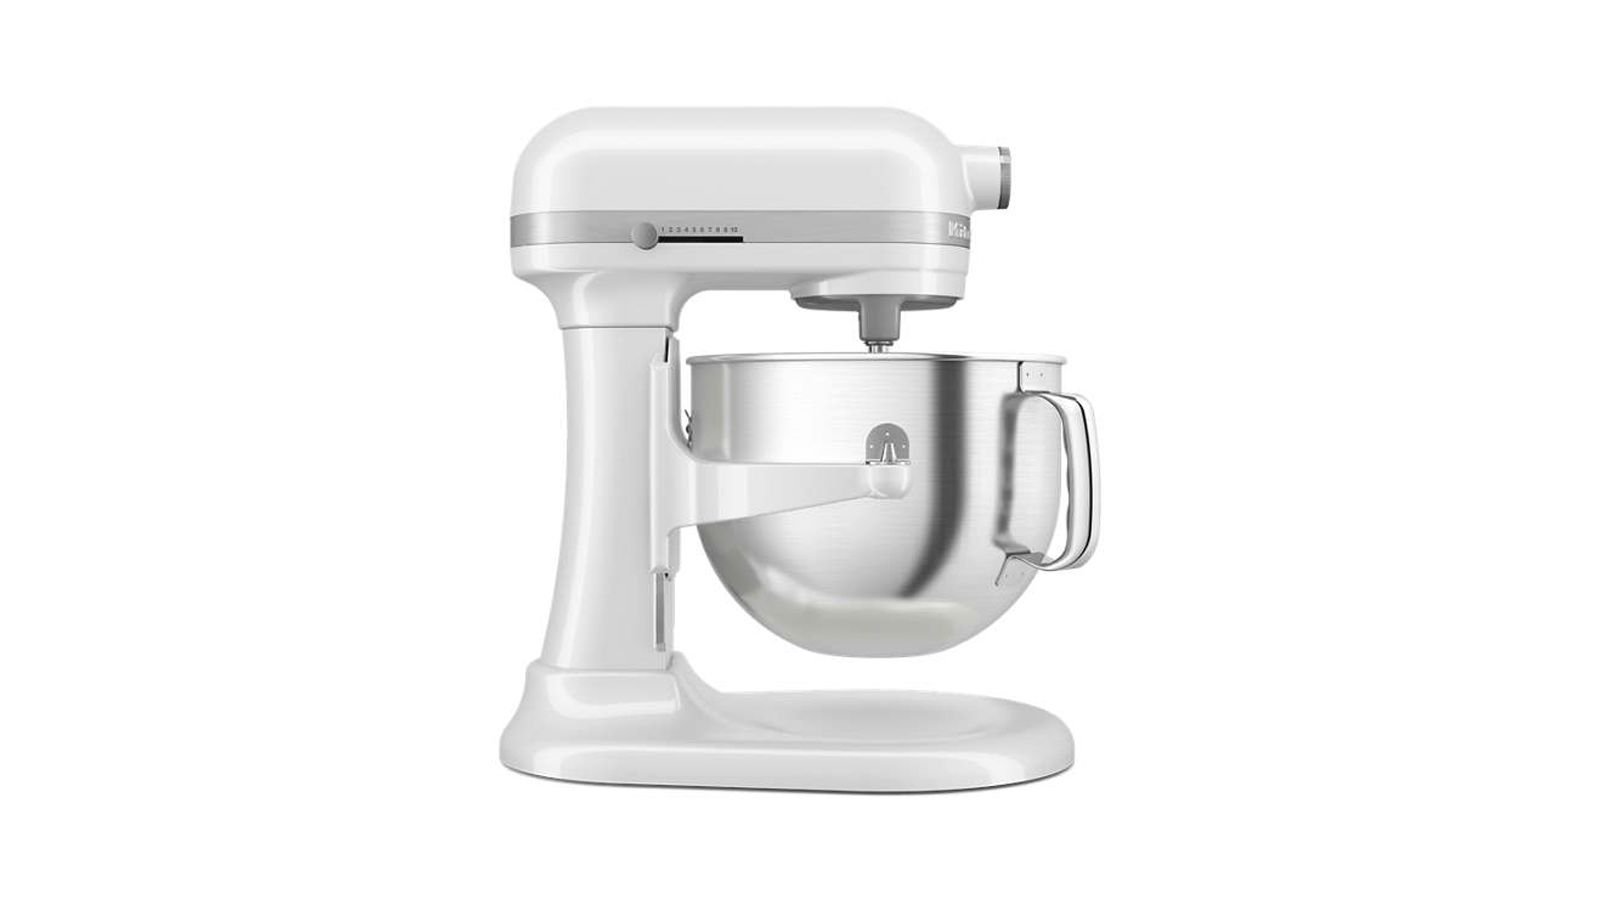 7 best KitchenAid Black Friday deals on mixers and more